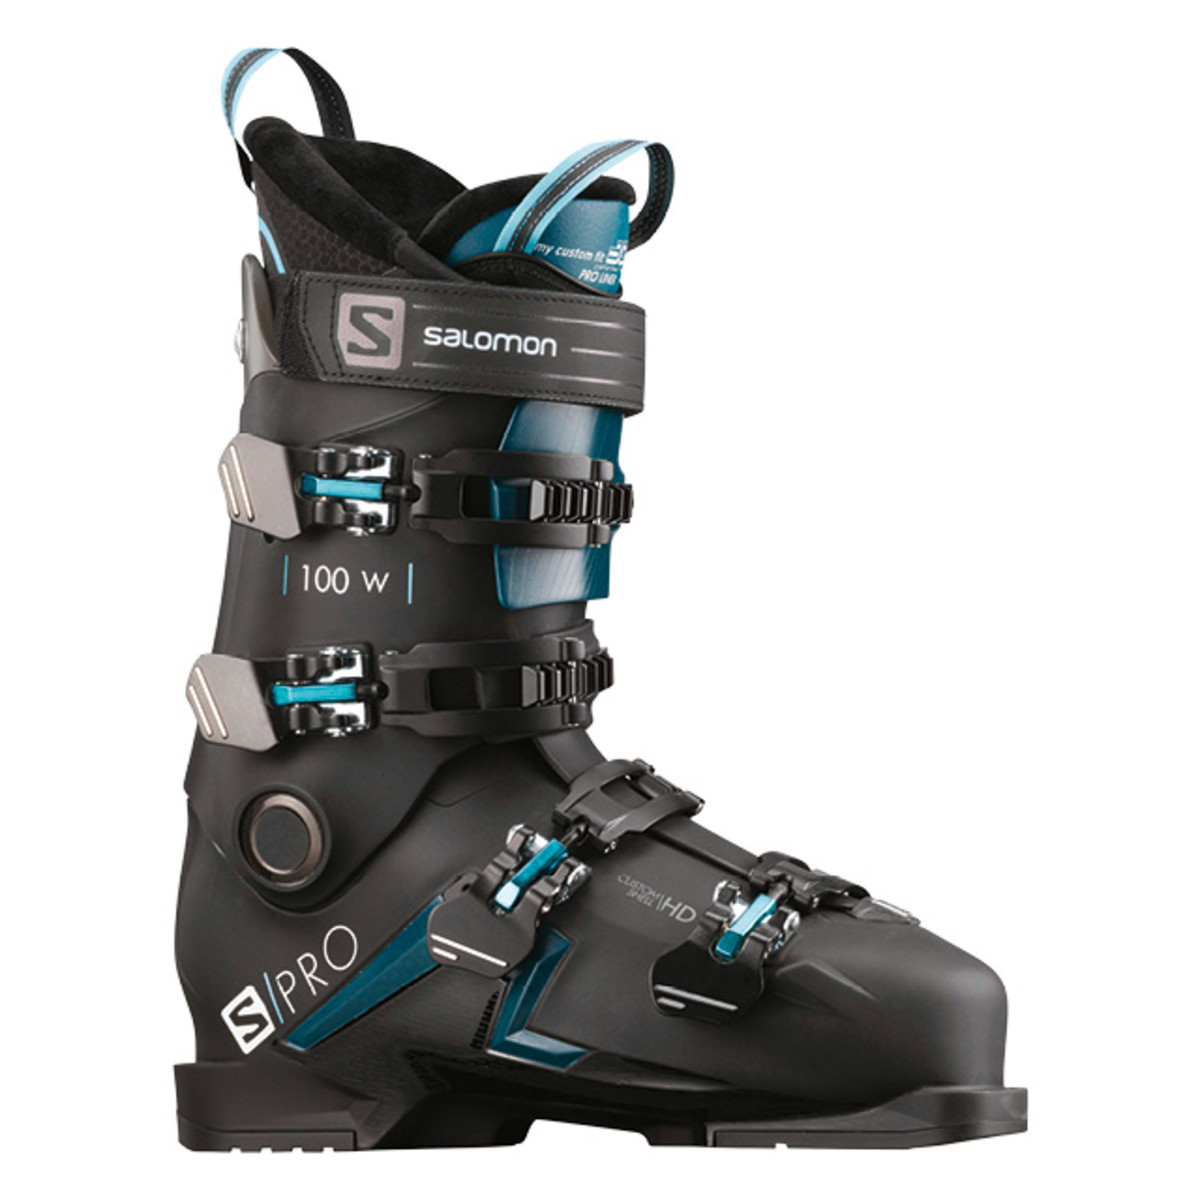 The Best Women's Ski Boots of the Year - Powder